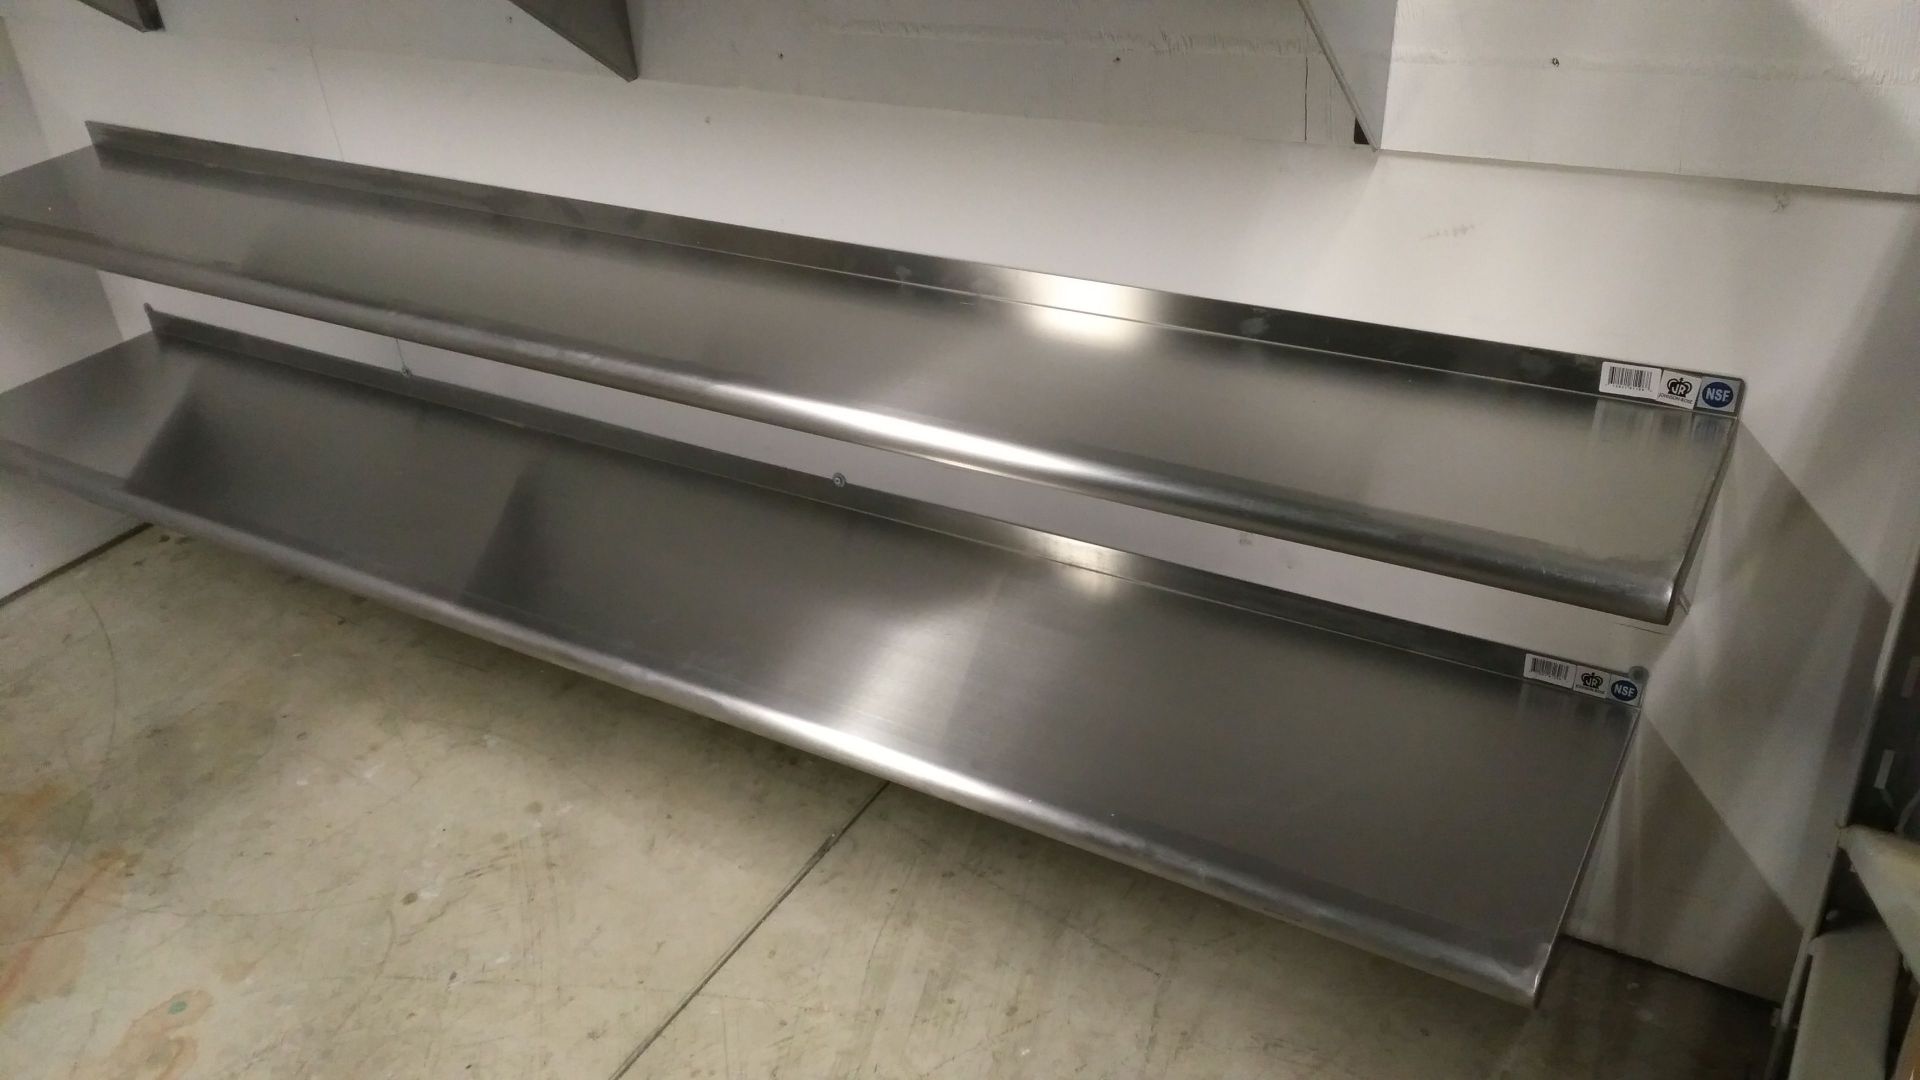 12" x 96" Stainless Wall Shelves - Lot of 2 - Image 2 of 4